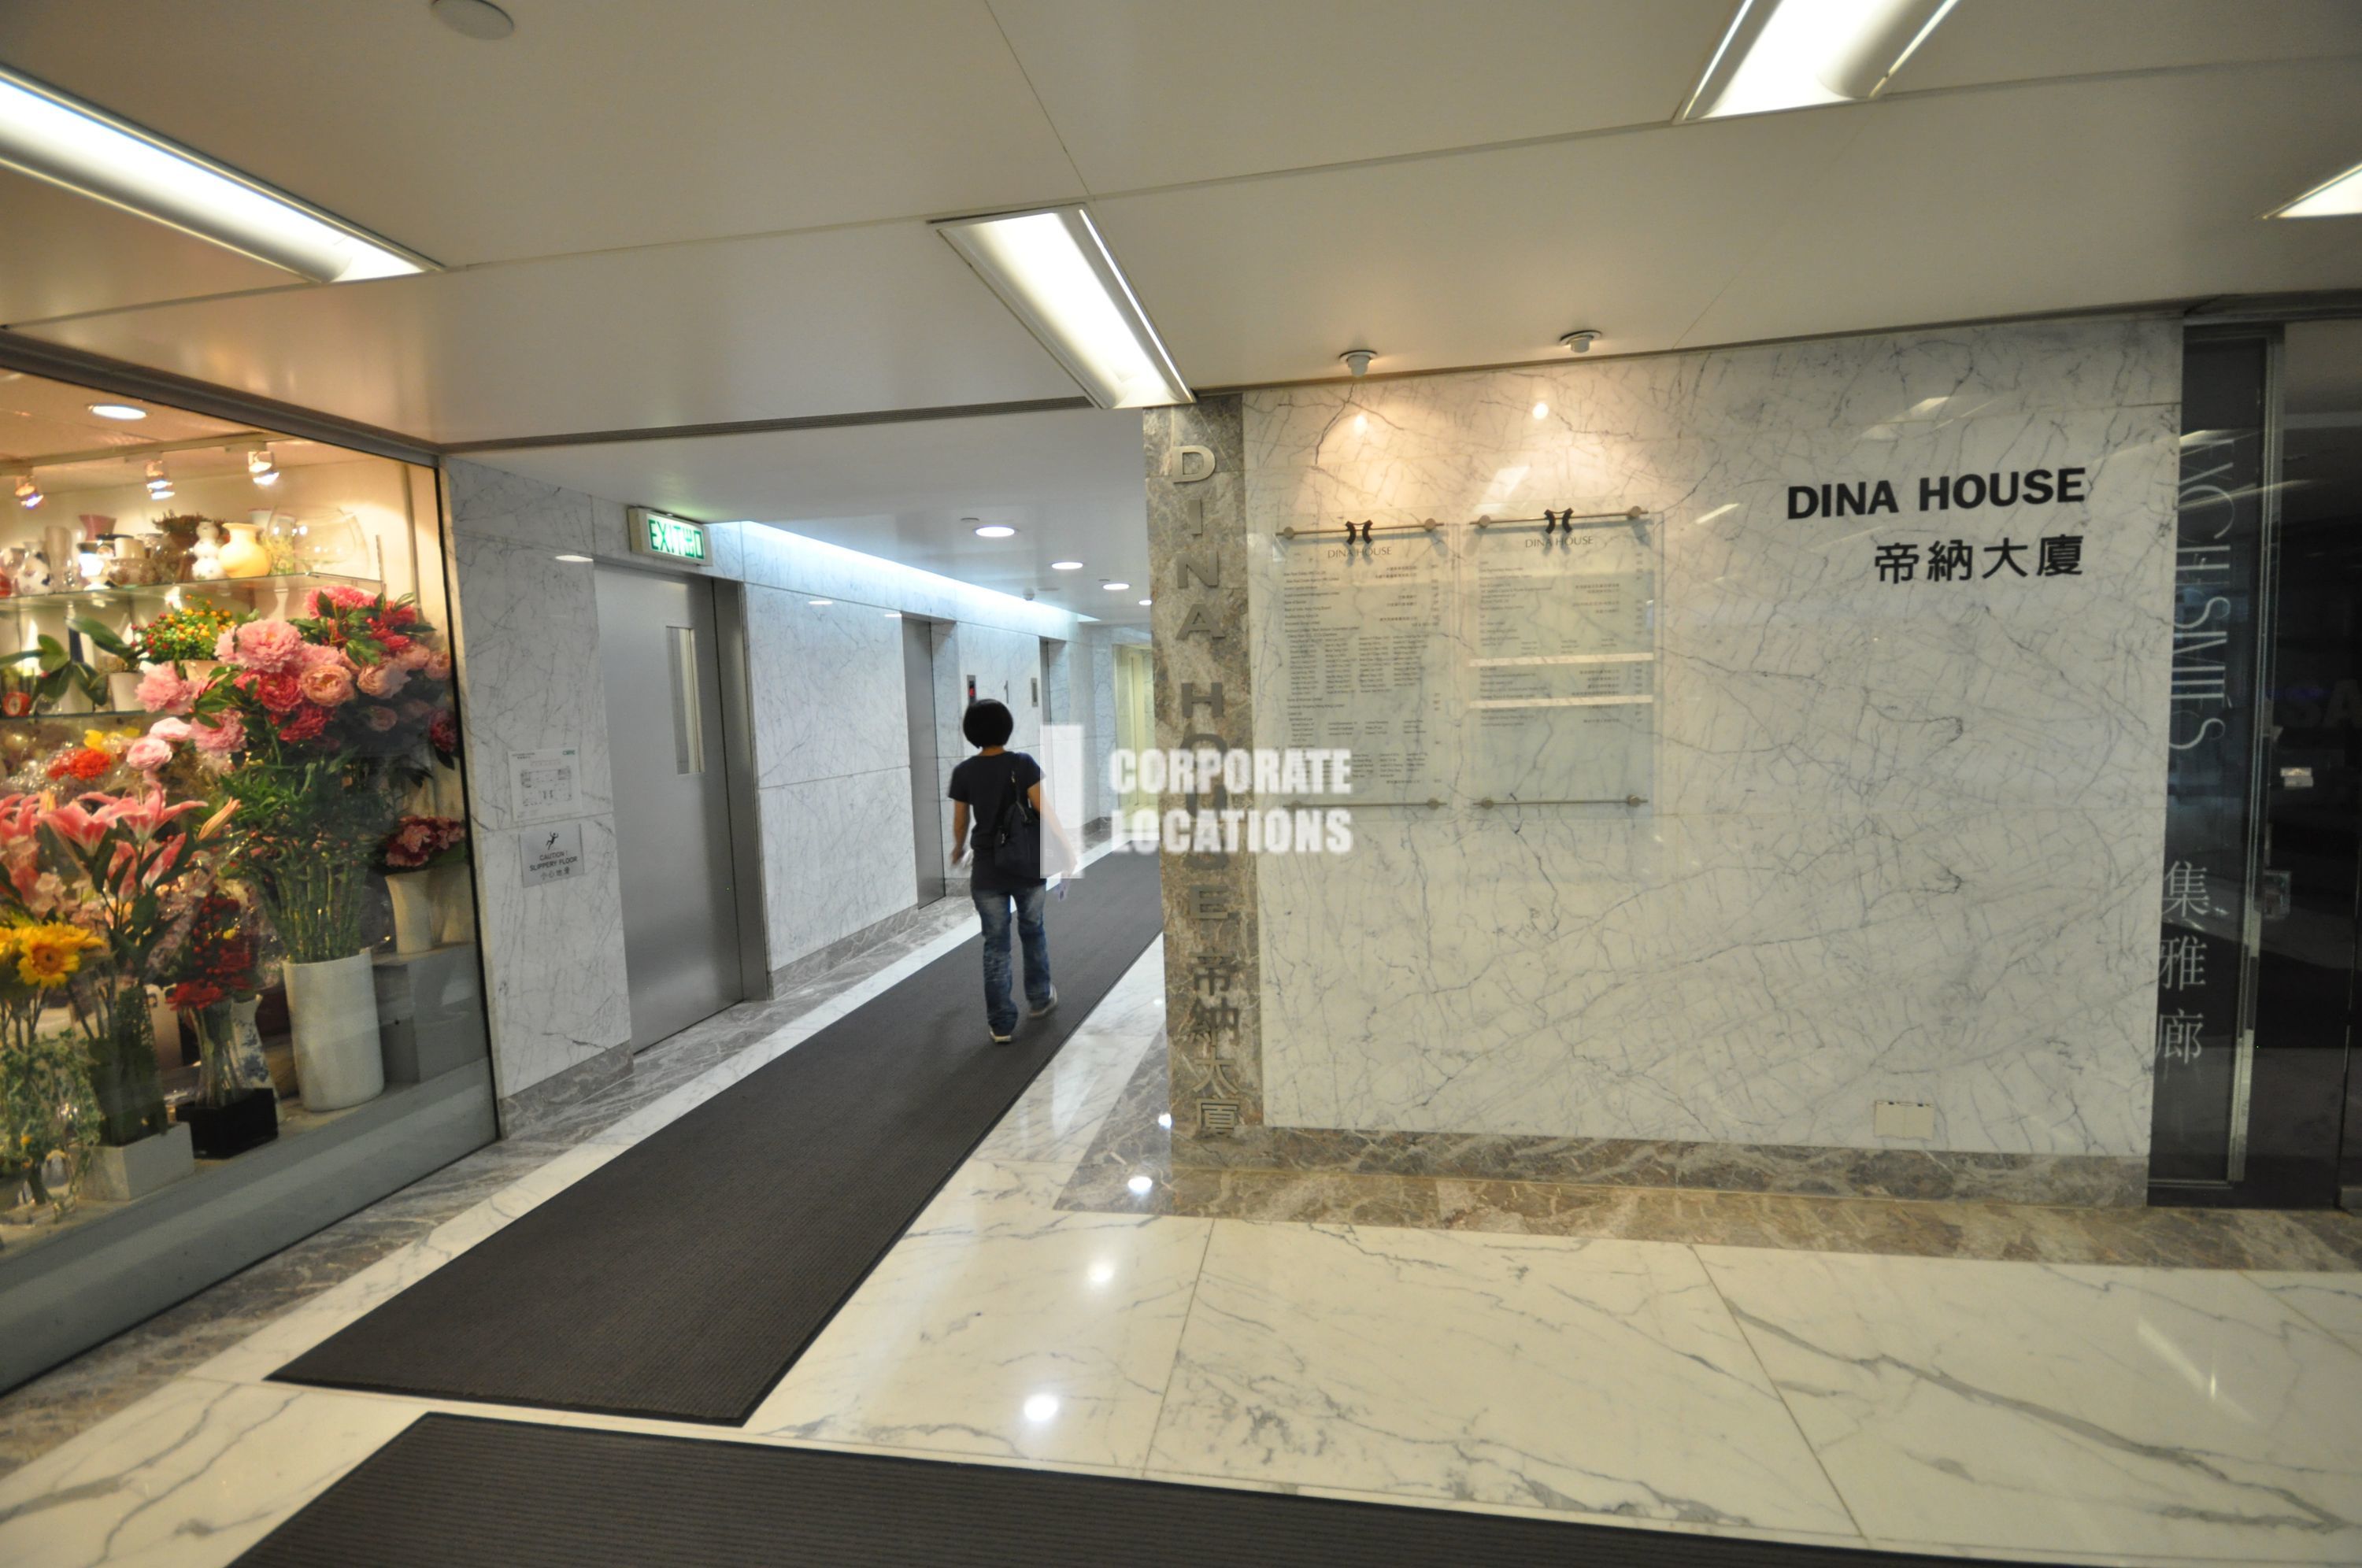 Lease offices in Dina House, Ruttonjee Centre - Central